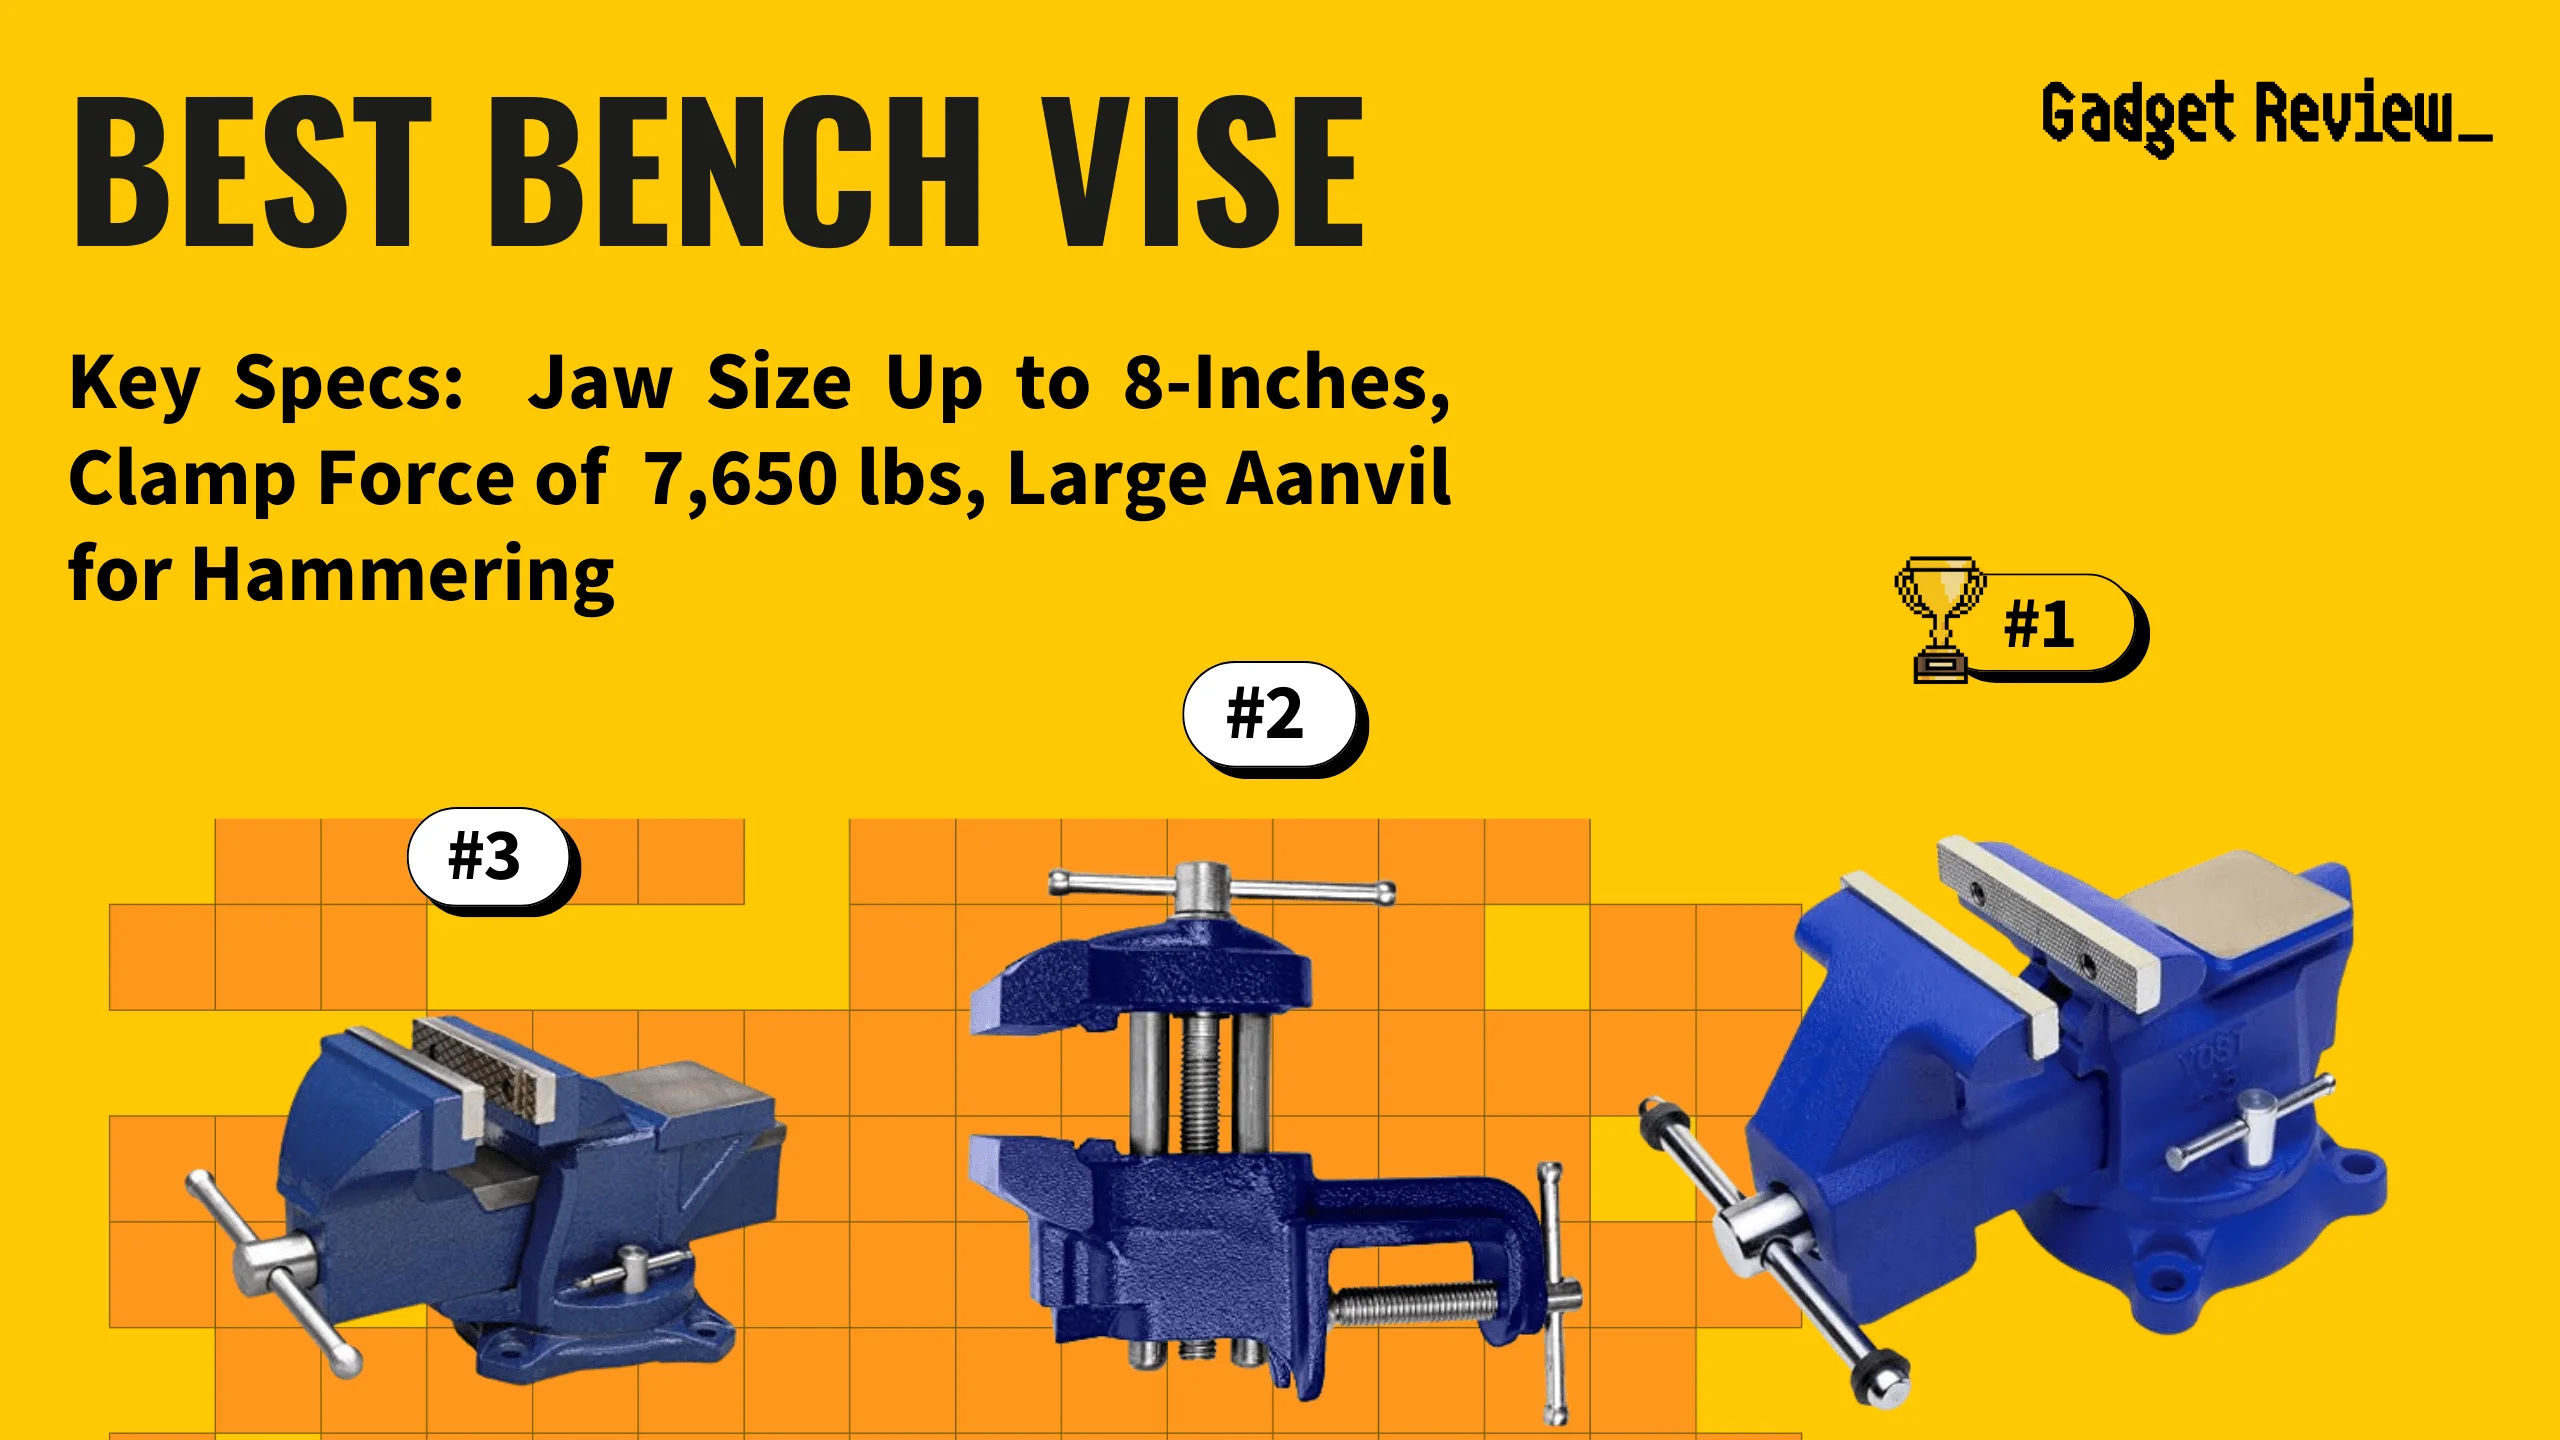 best bench vise featured image that shows the top three best tool models